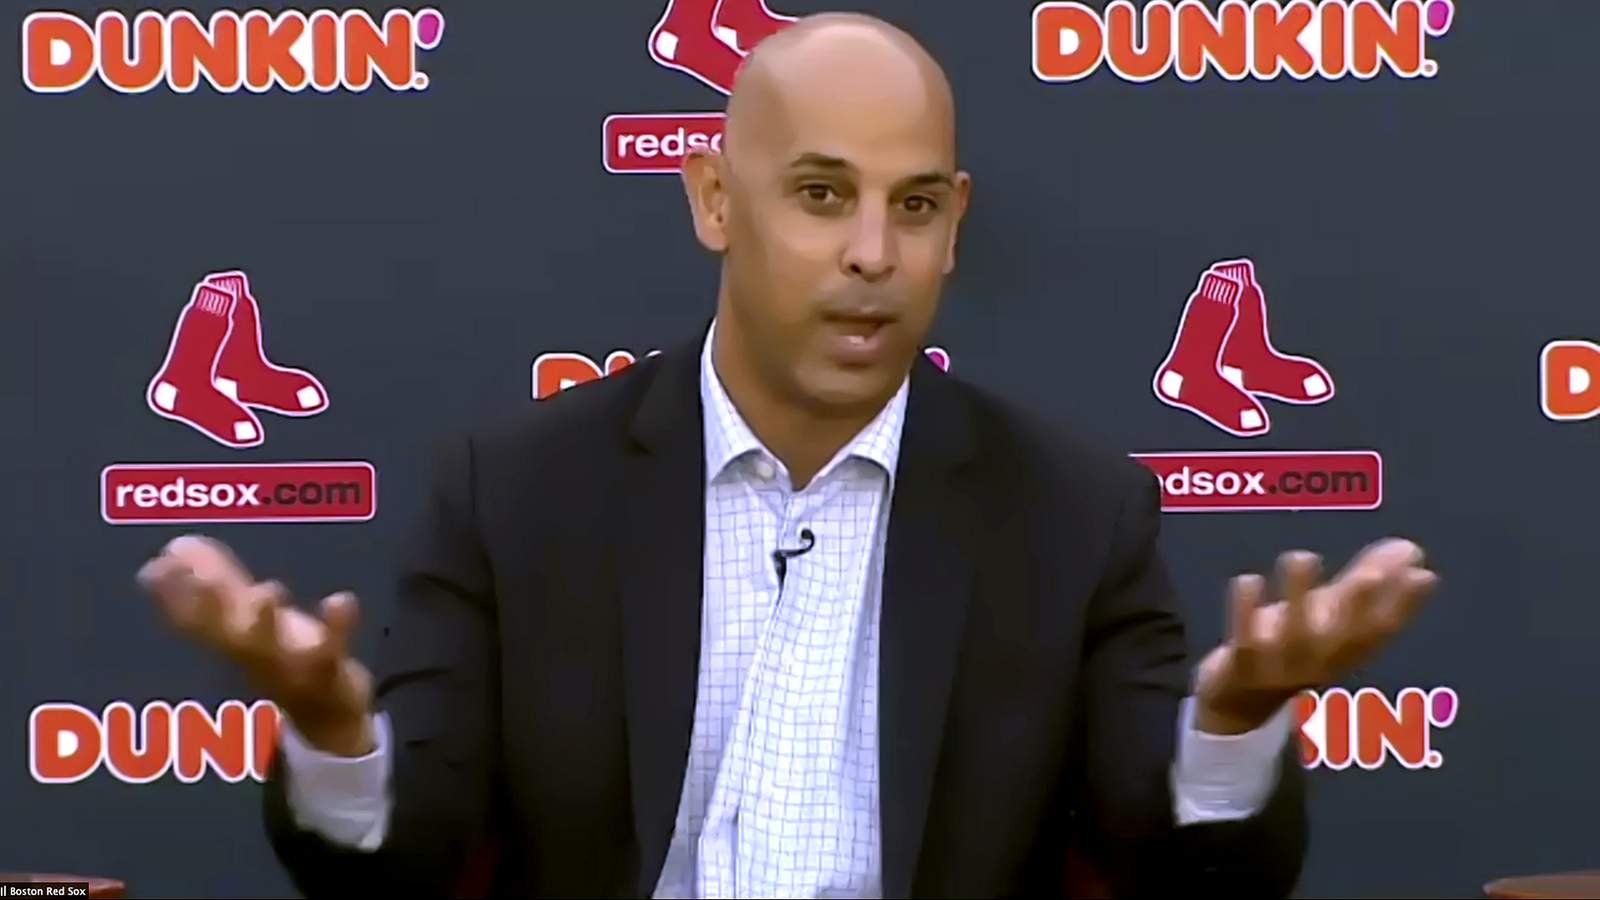 Back in Boston, Red Sox's Cora vows to be above reproach